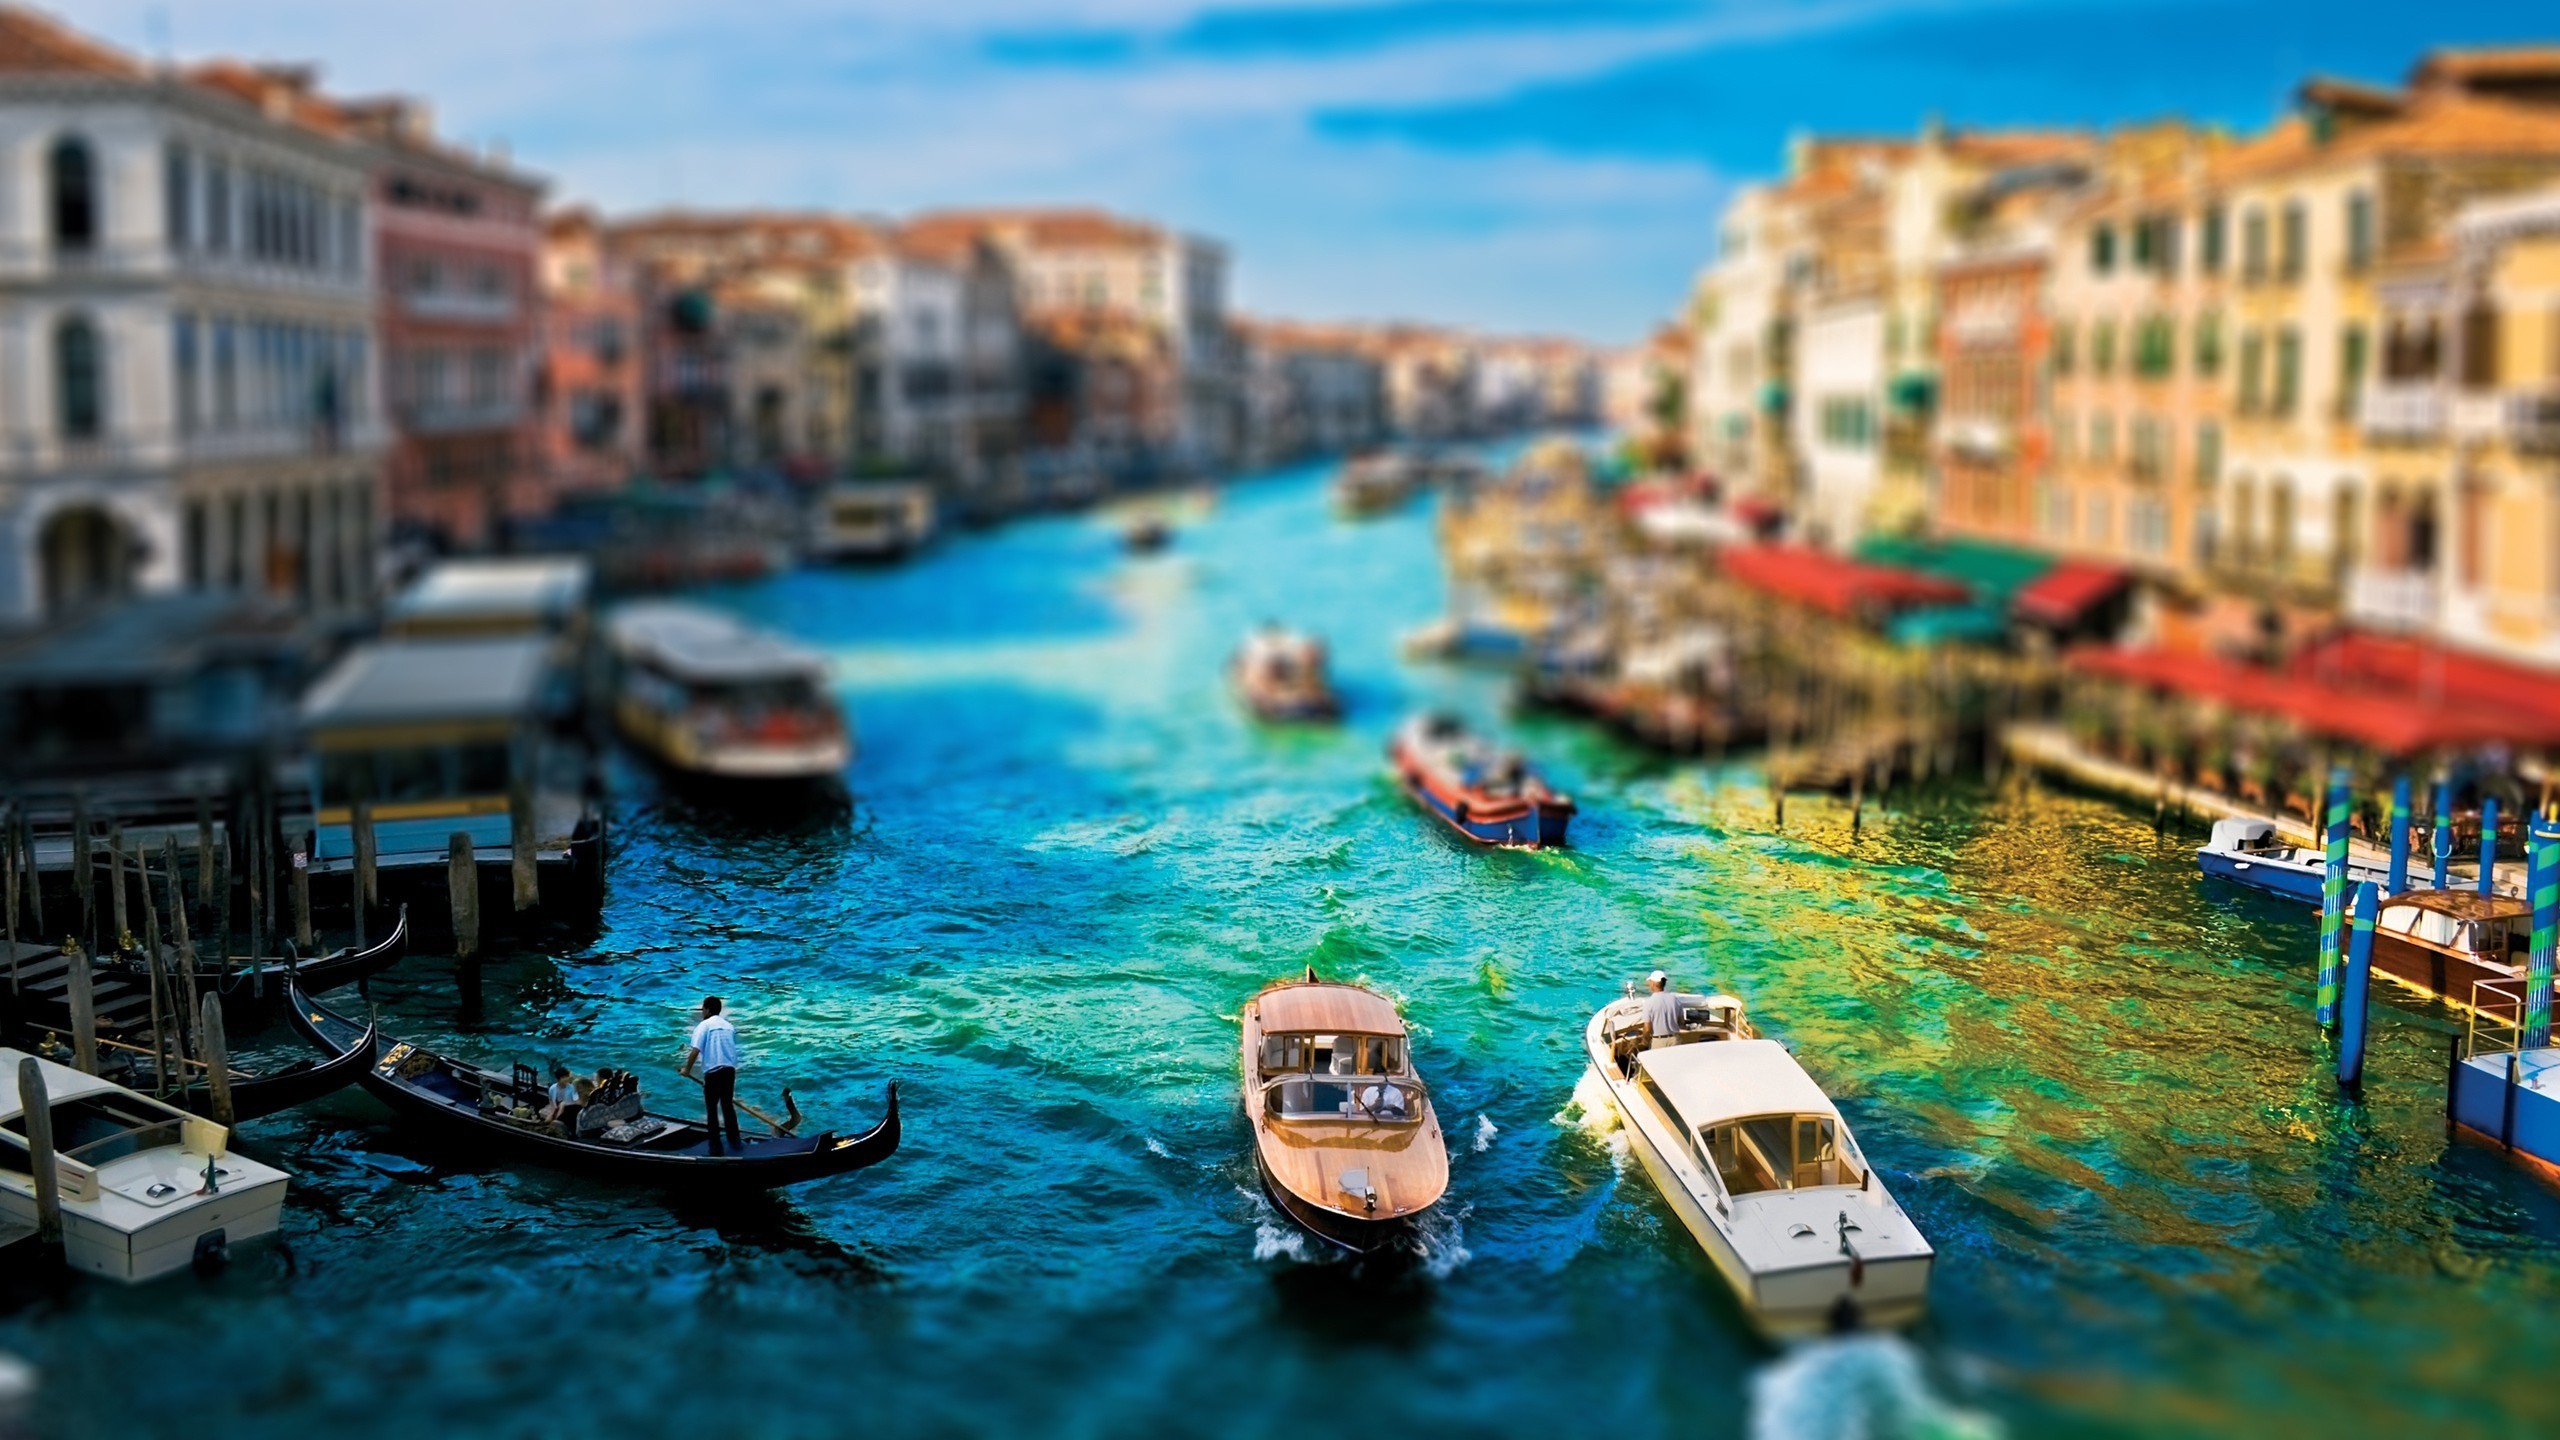 General 2560x1440 cityscape Venice tilt shift building boat blurred Grand Canal Italy water digital art